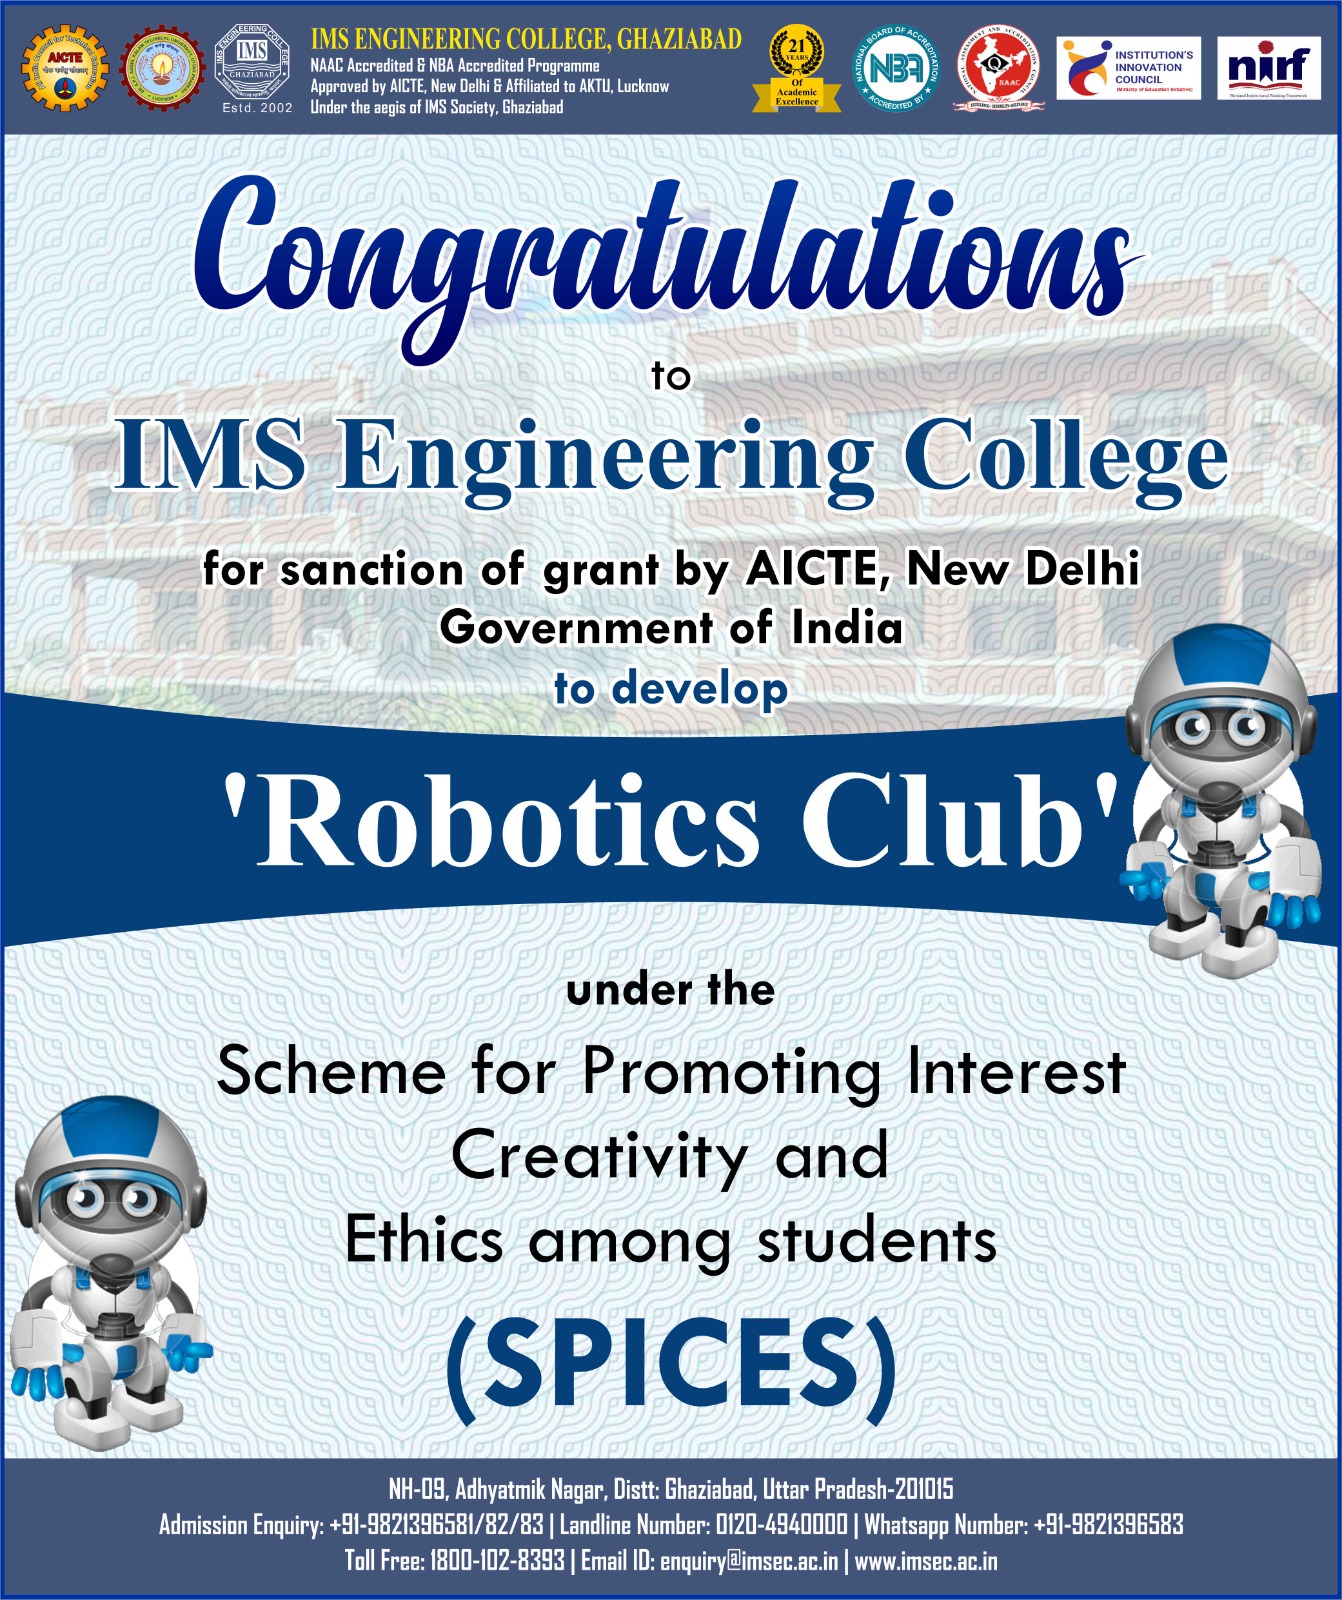 IMS Engineering College, Ghaziabad has received approval for a grant under the Scheme for Promoting Interest, Creativity and Ethics among Students (SPICES) for the financial year 2022-23